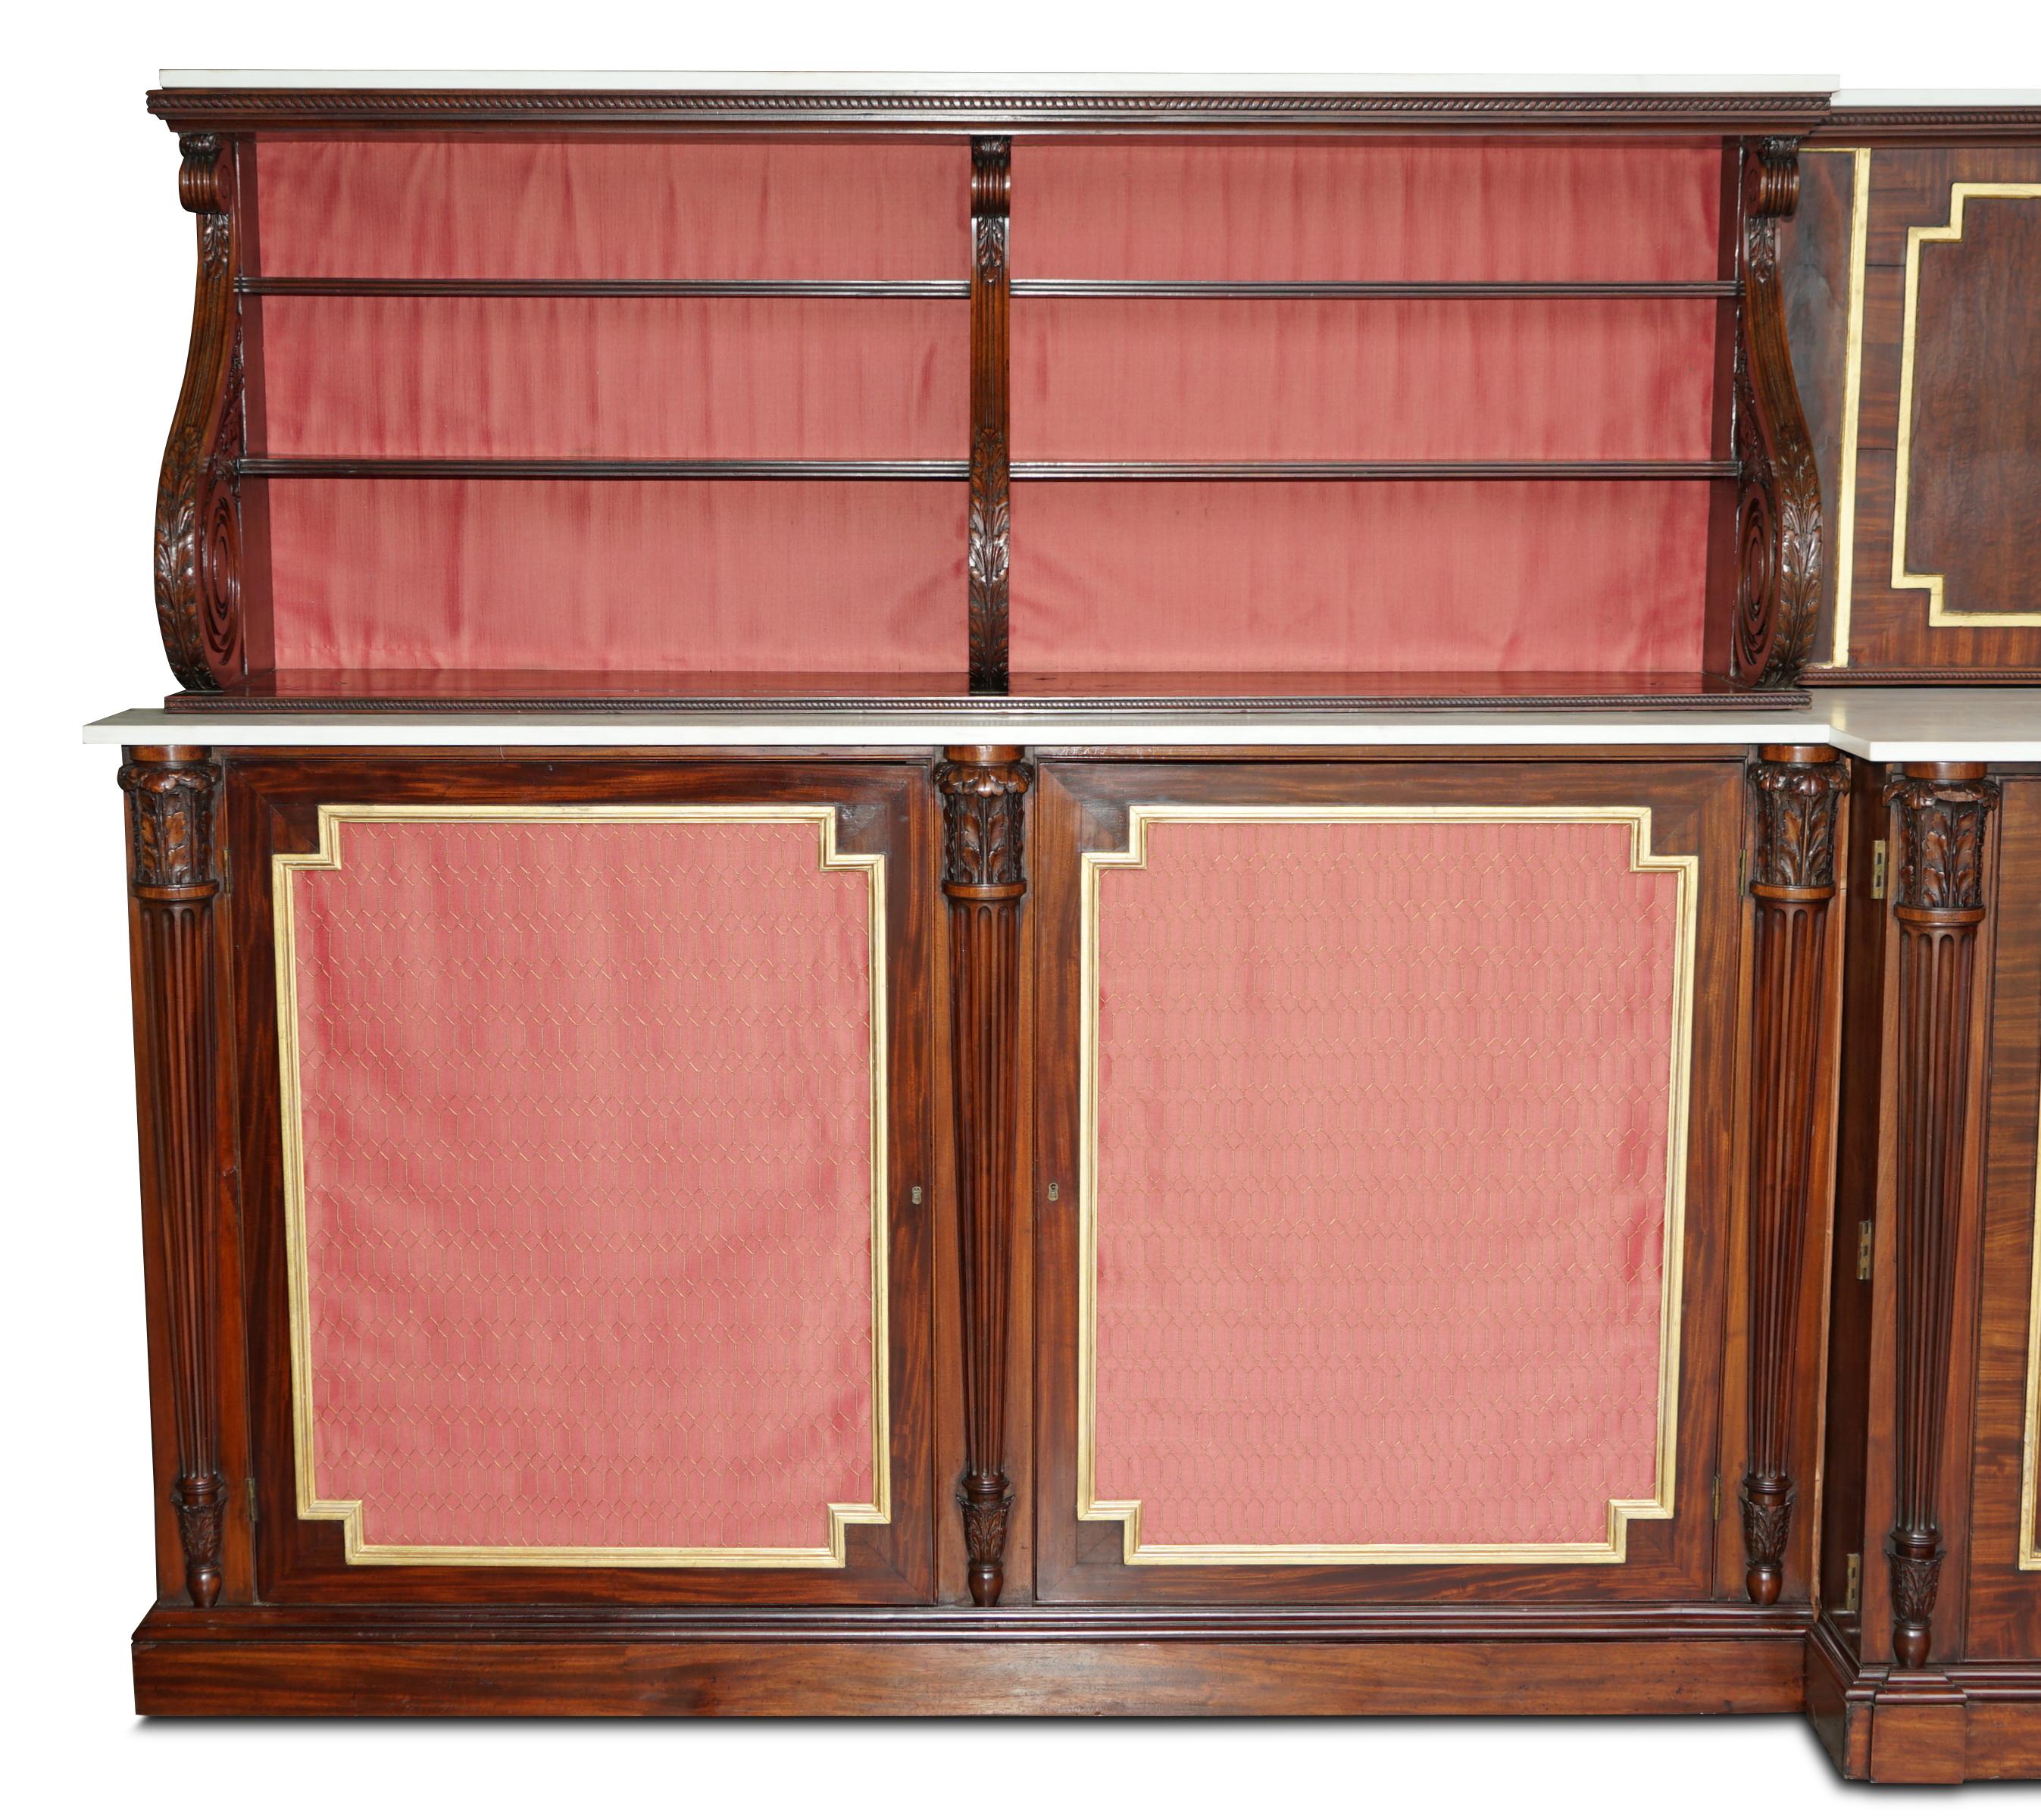 We are delighted to offer for sale this very rare and important, Museum quality, Regency Rosewood & Italian Marble sideboard of monumental proportions.

I have never seen another quite this size before, it is 1.92 meters tall and 5.76 meters wide,